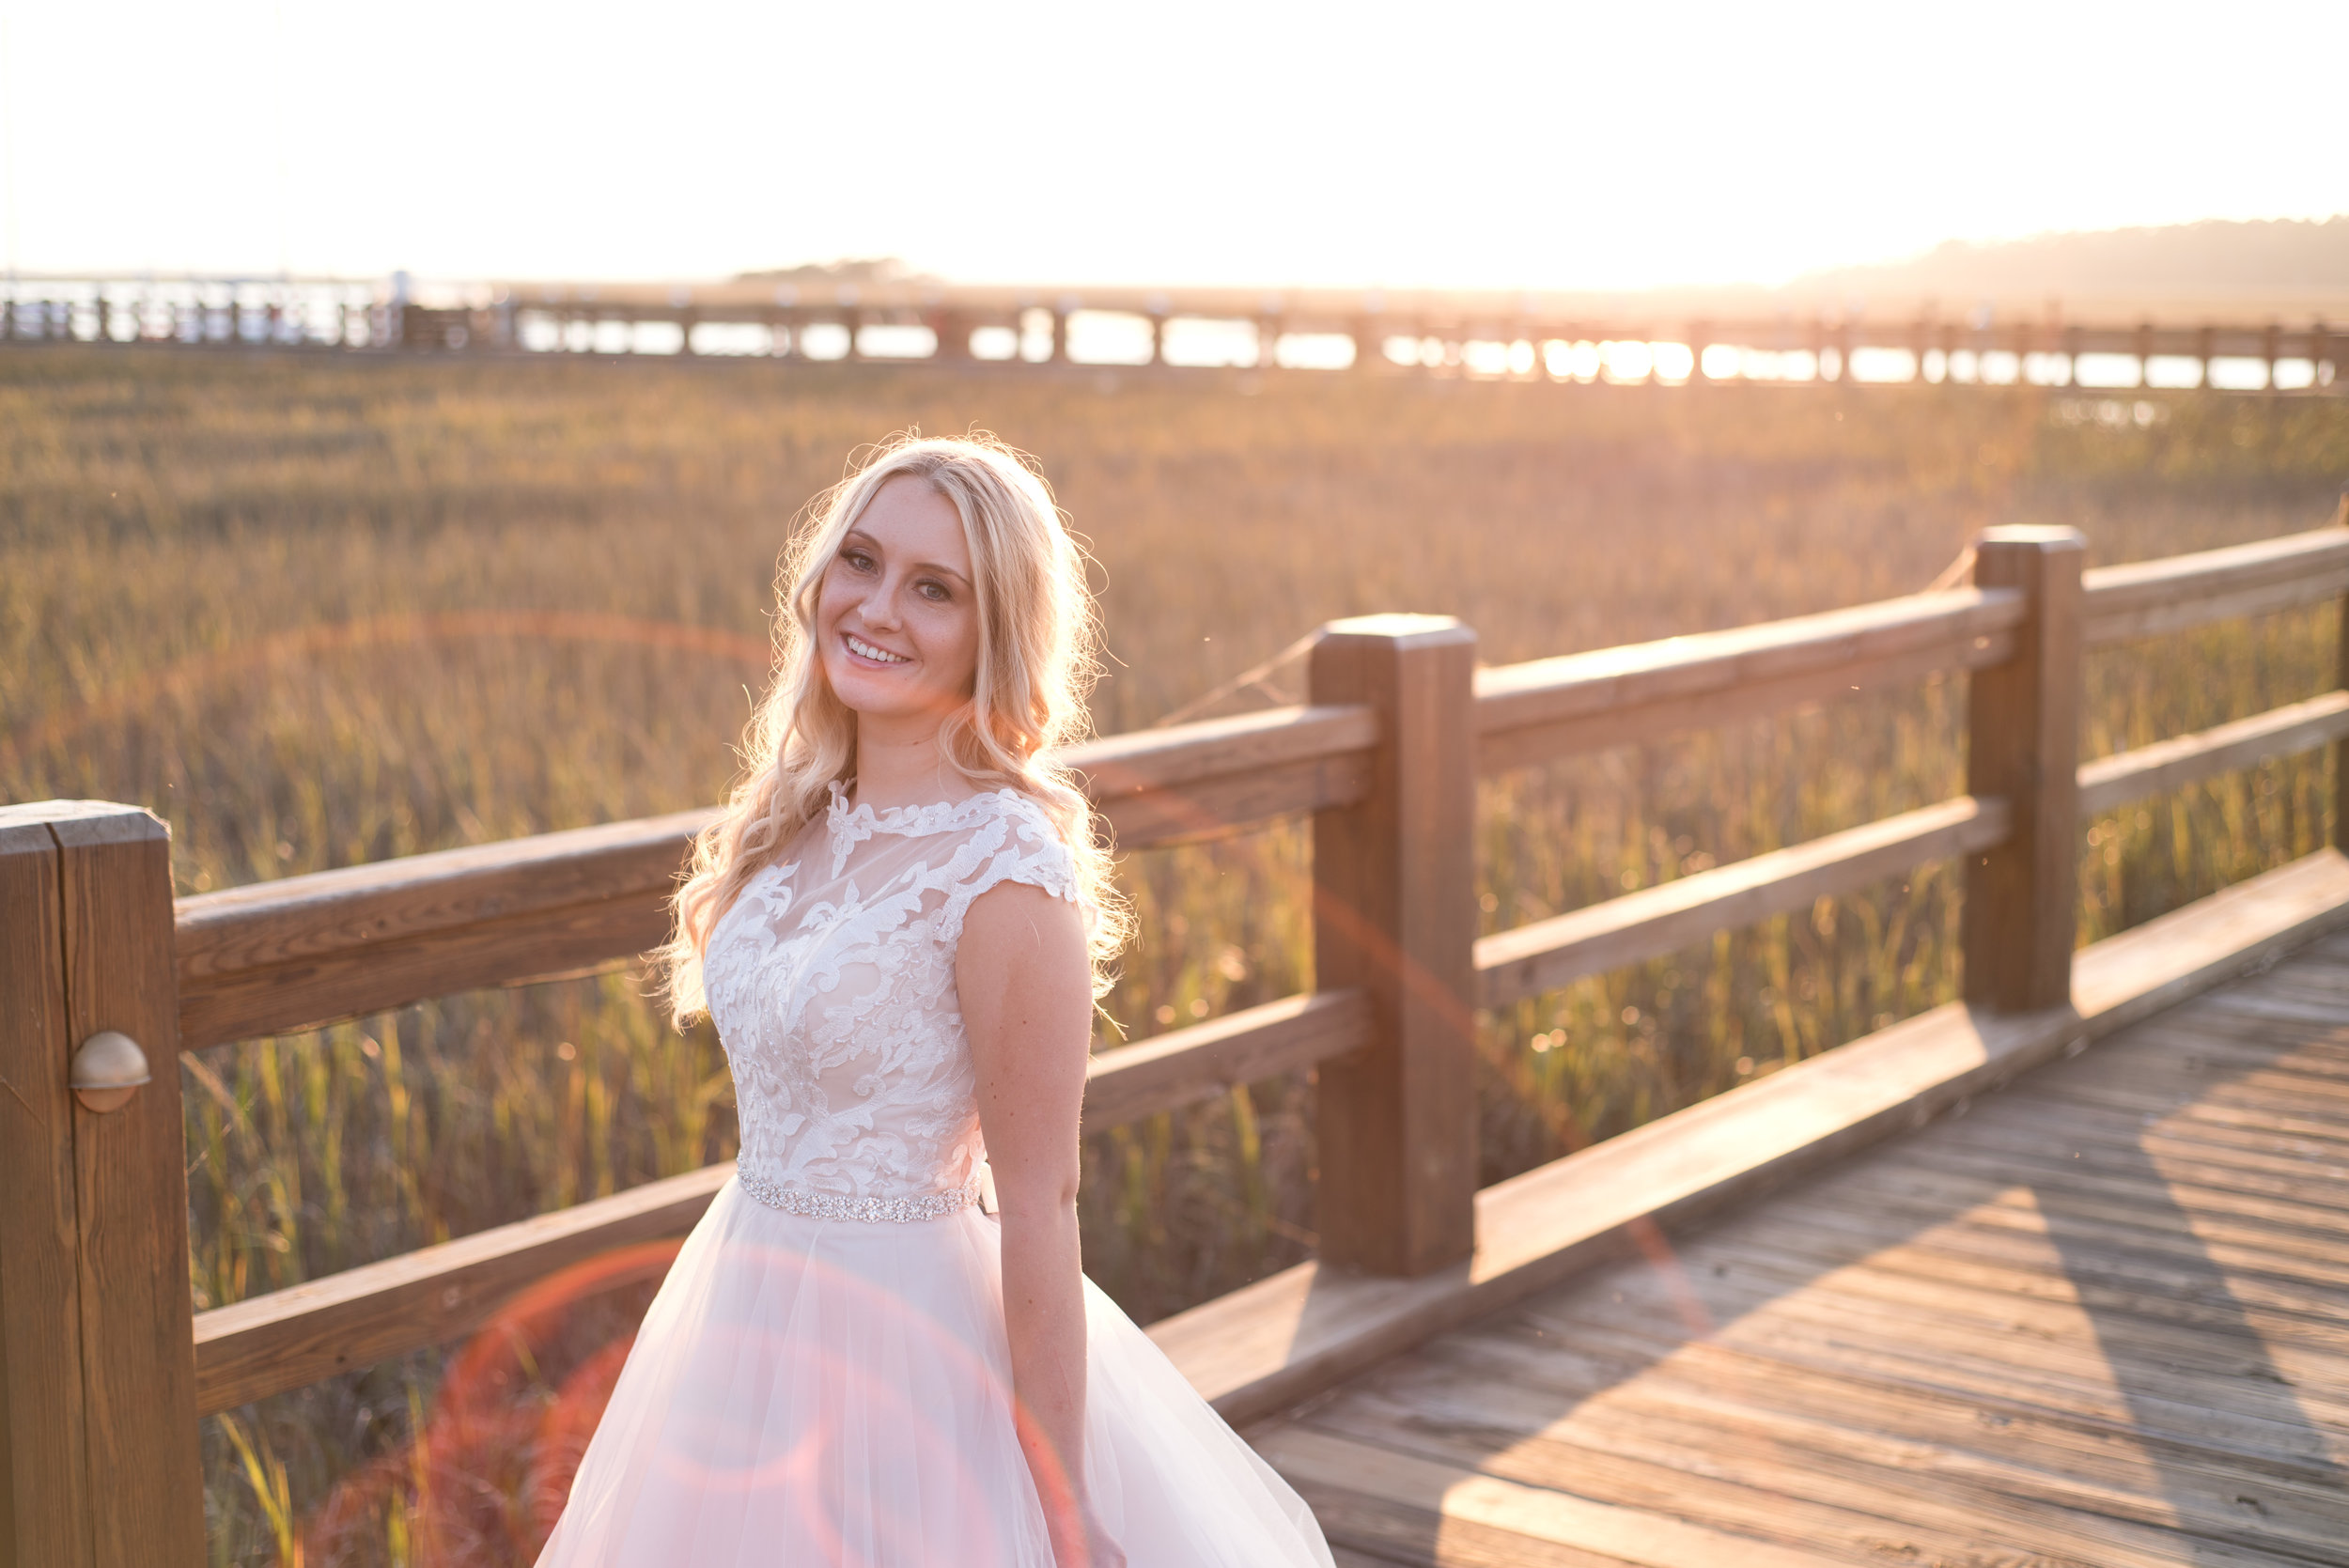 Ivory-and-Beau-bridal-boutique-Delegal-Marina-Samba-to-the-Sea-Photography-carrie-maggie-sottero-rebecca-ingram-bridal-savannah-bridal-boutique-savannah-weddings-marsh-wedding-georgia-wedding-savannah-wedding-sunset-wedding-savannah-wedding-gowns-2.jpg